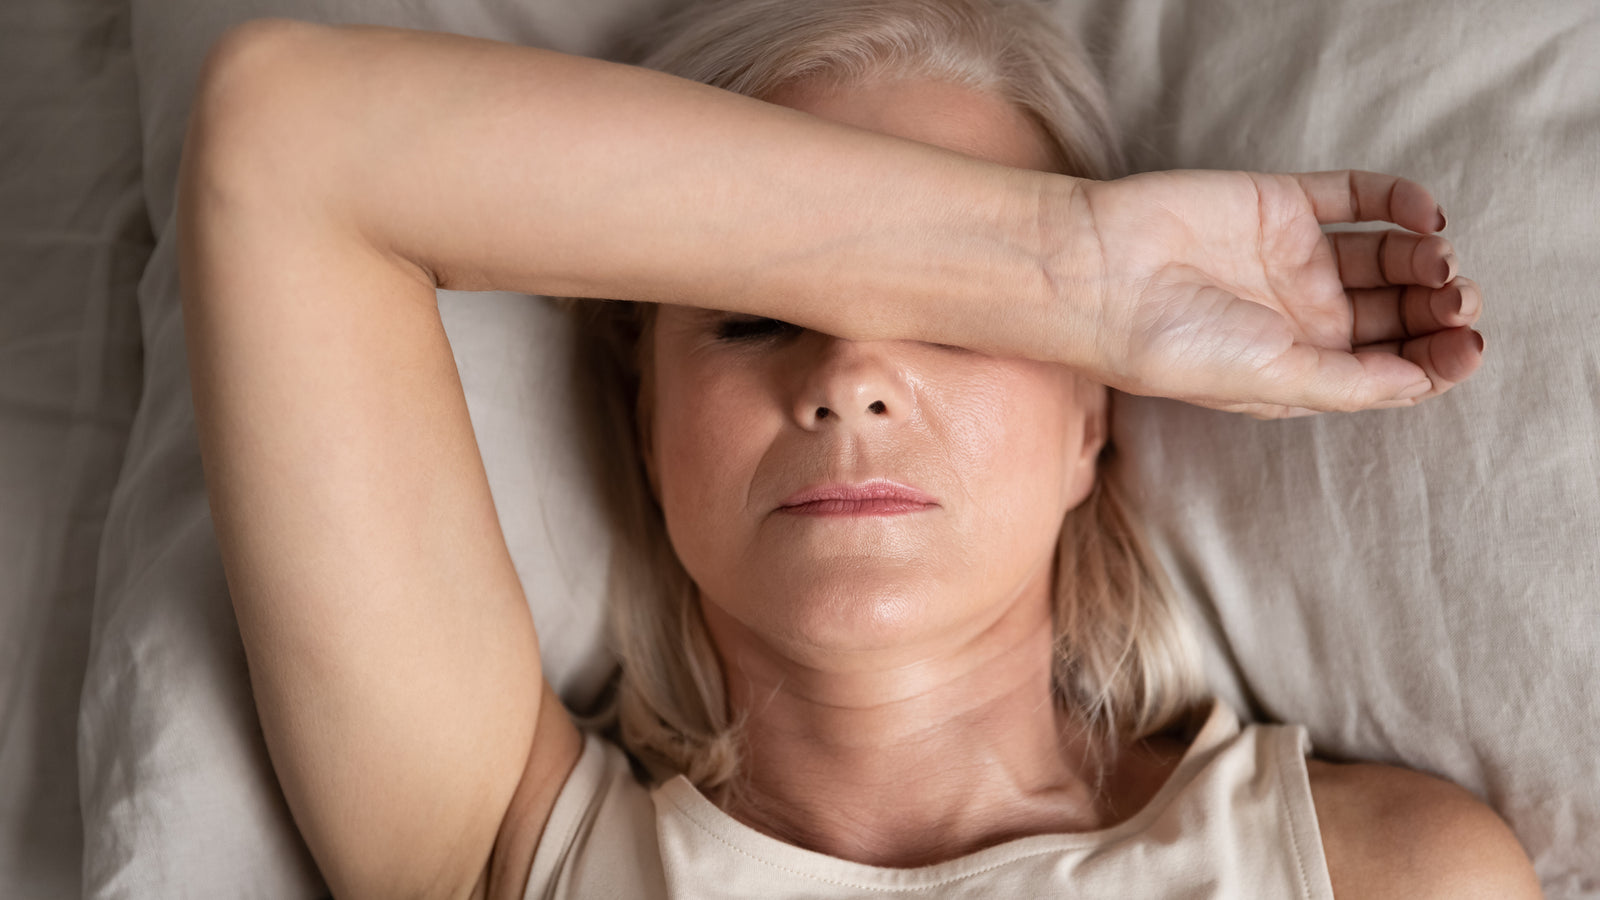 A woman lies on a bed with her arm over her eyes.